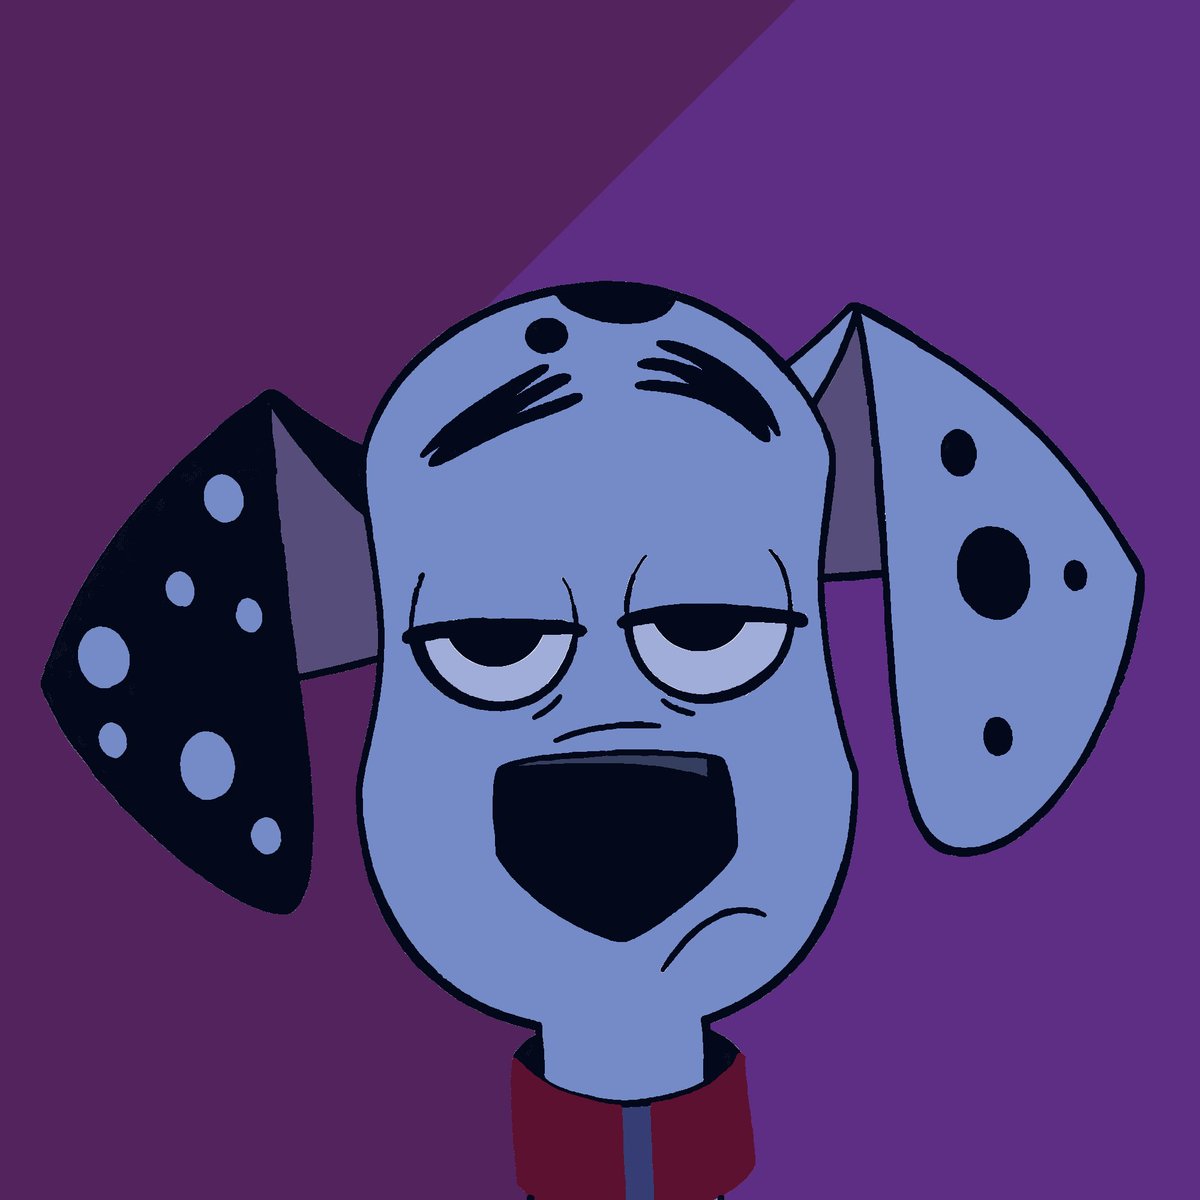 i'm better now and i want to get better at my drawings and I want make your ocs and stuff and dylan bored 
#Save101DalmatianStreet #101DalmatianStreet #101DS